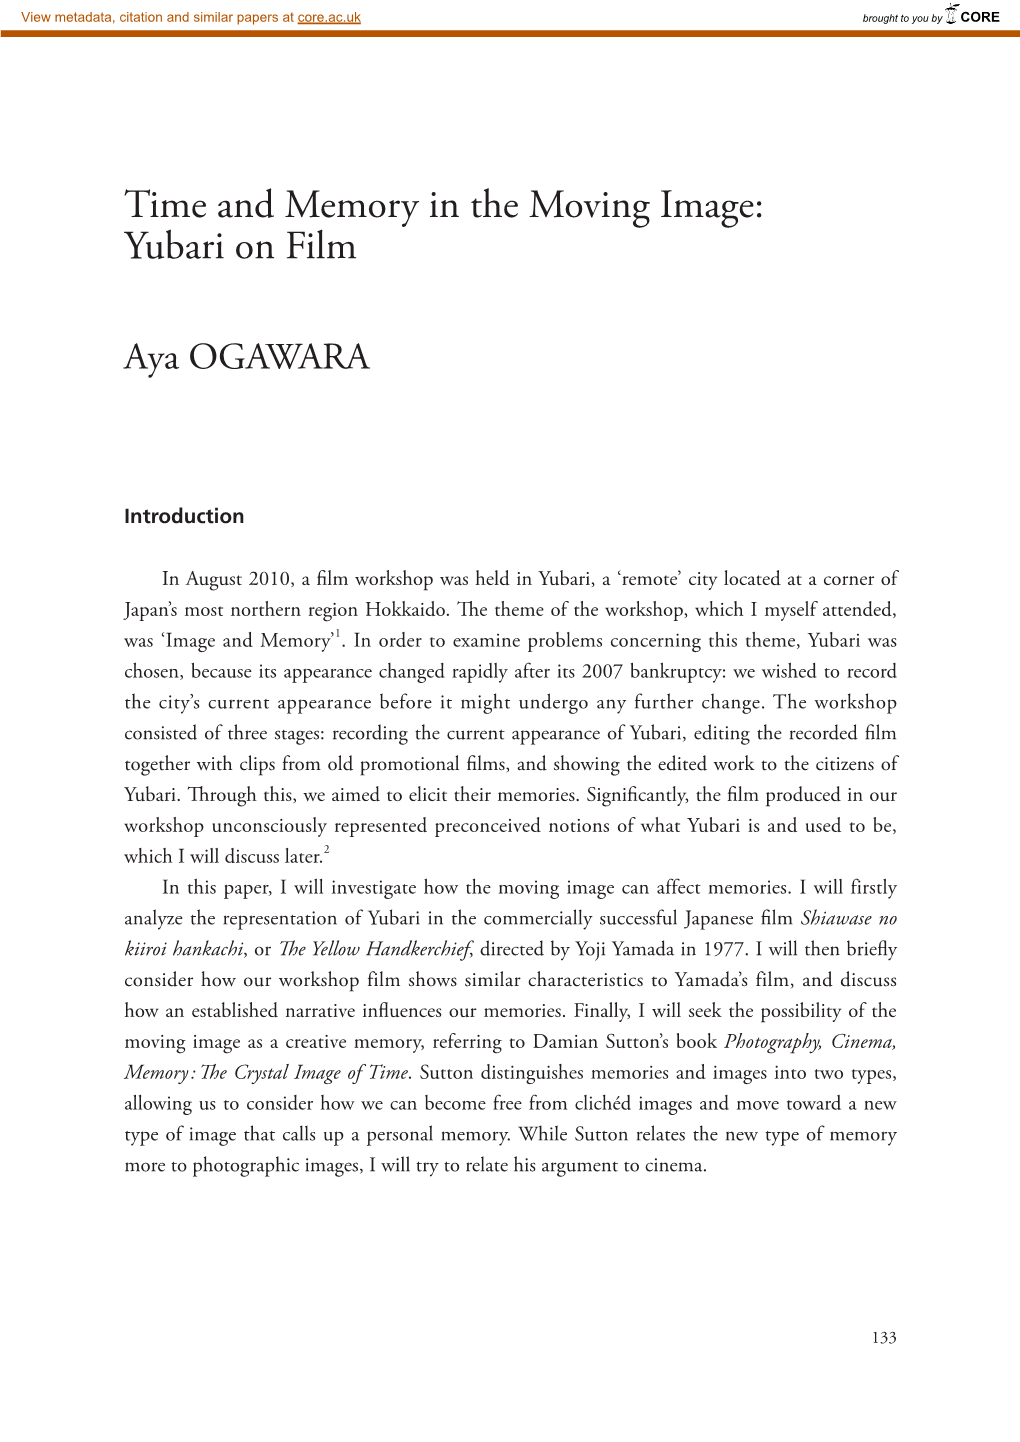 Time and Memory in the Moving Image: Yubari on Film